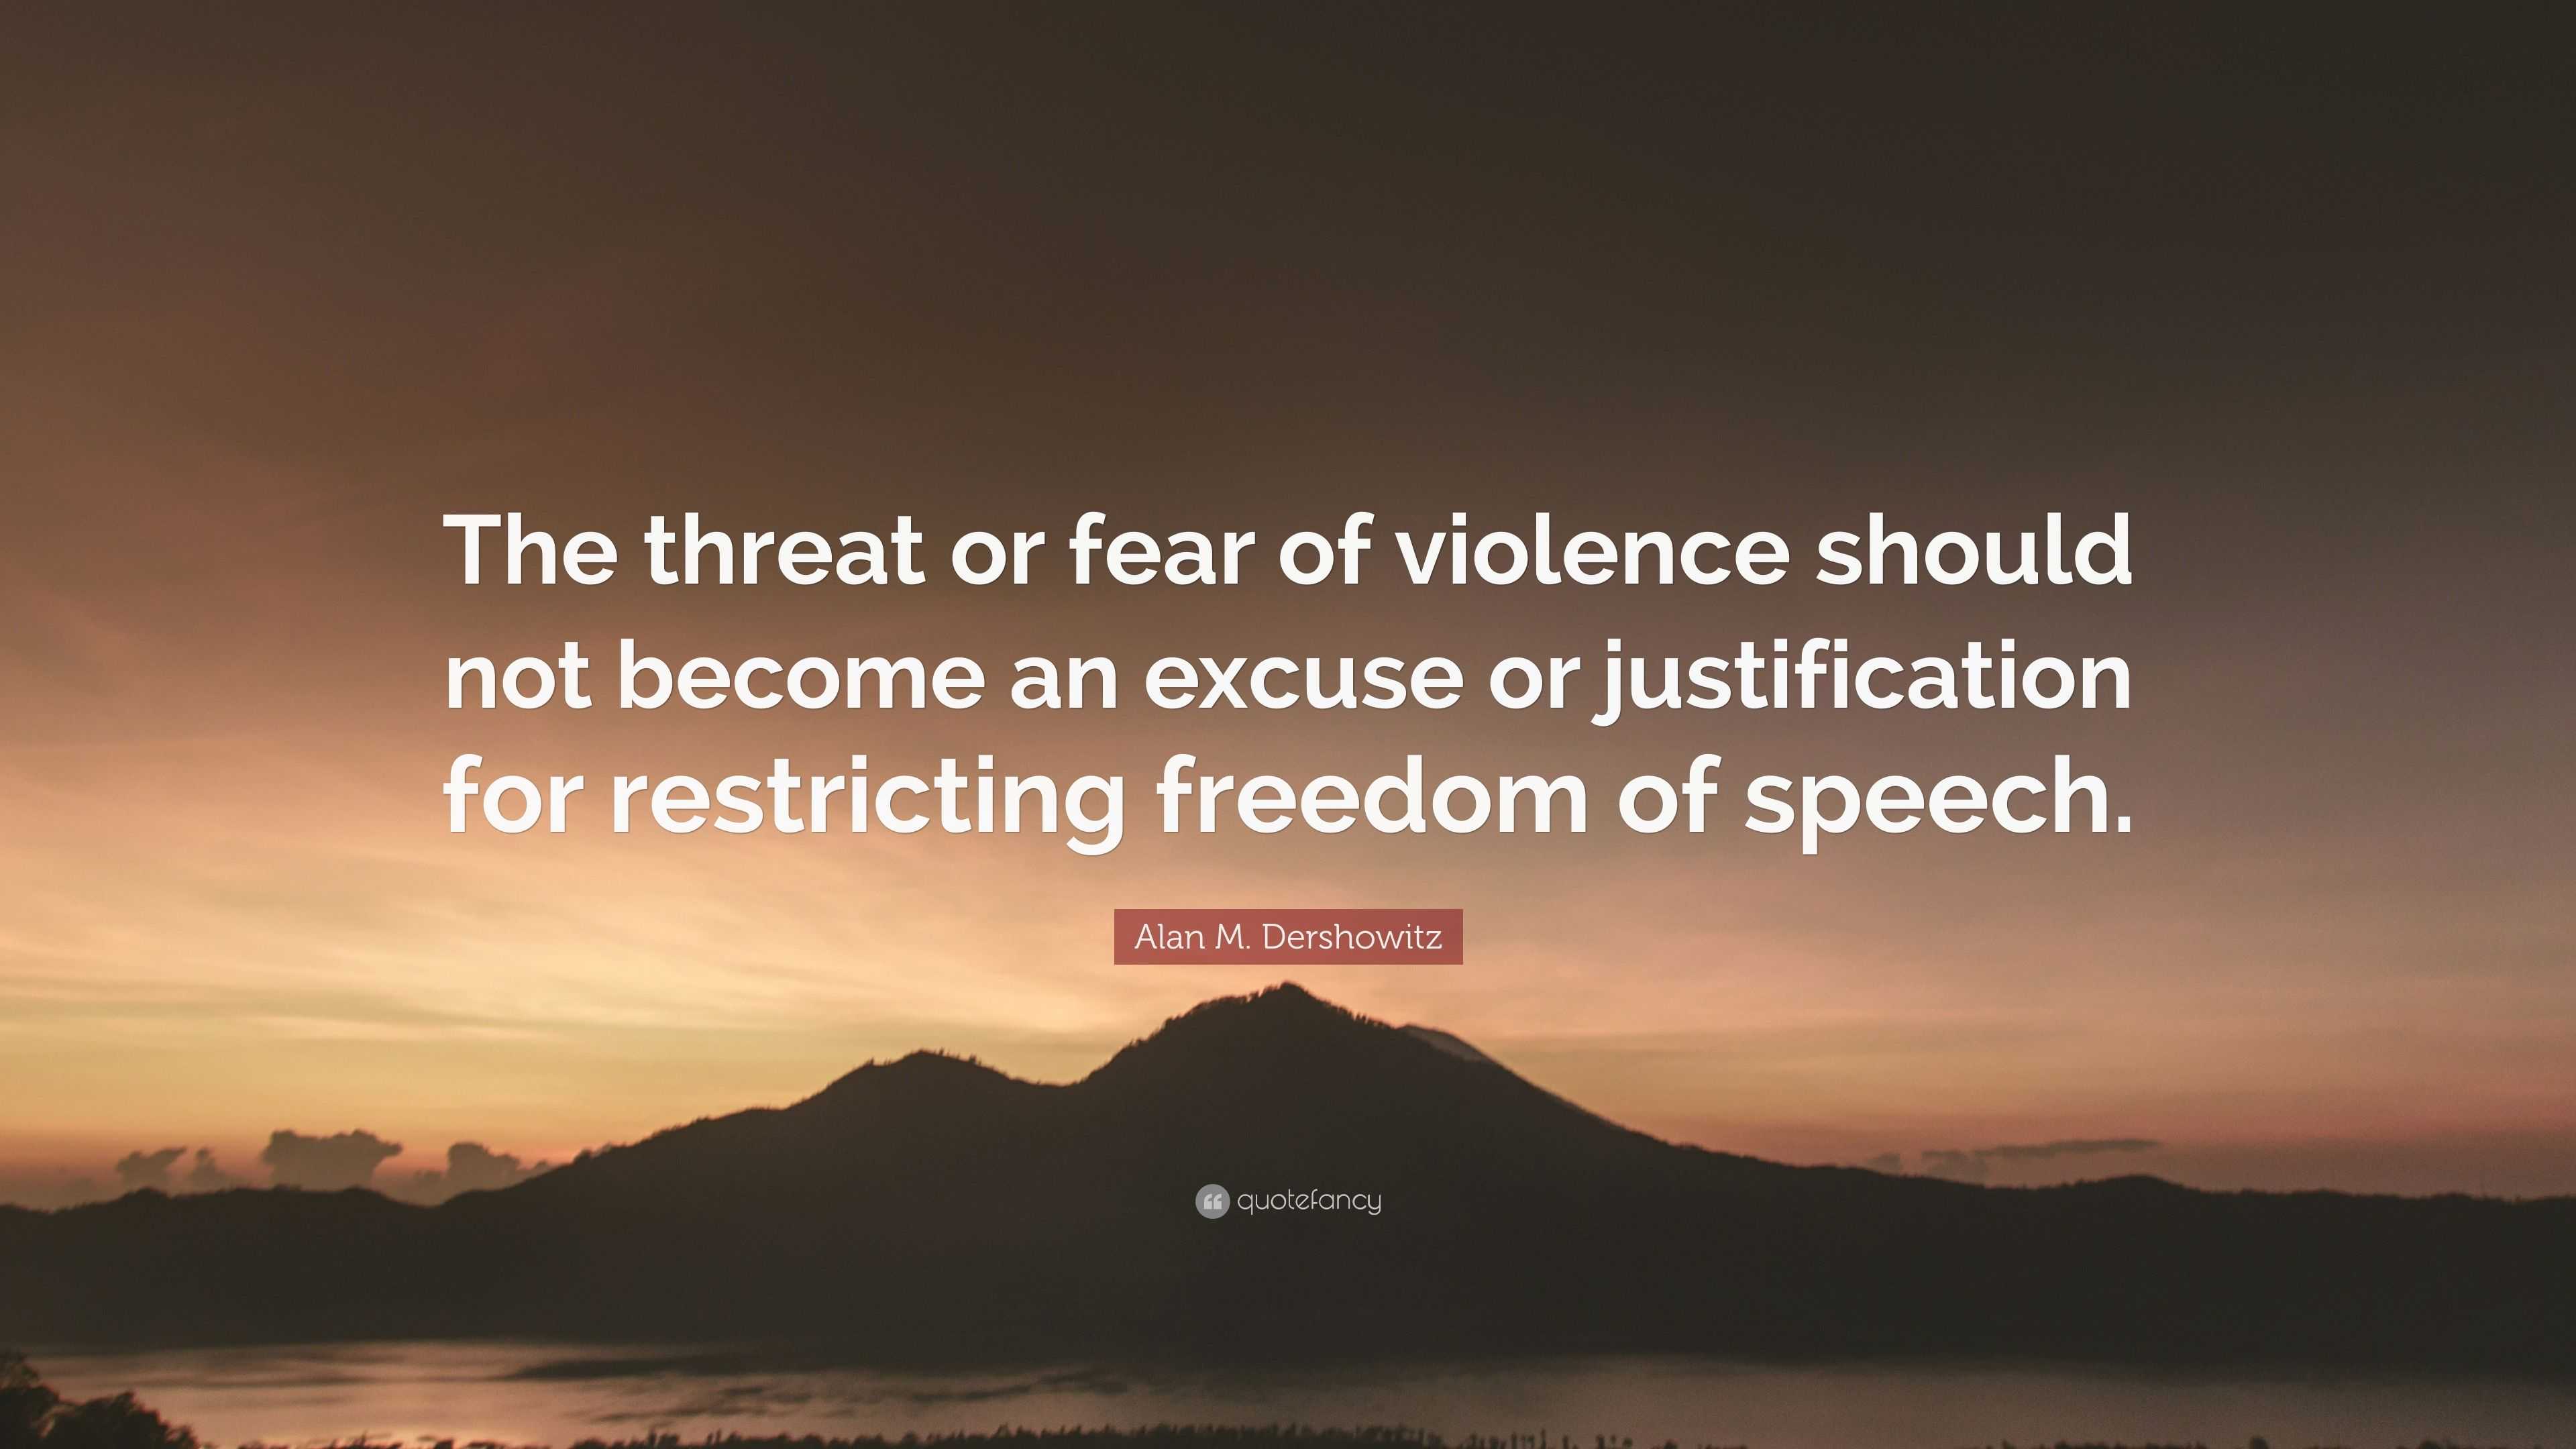 Alan M. Dershowitz Quote: “The threat or fear of violence should not ...